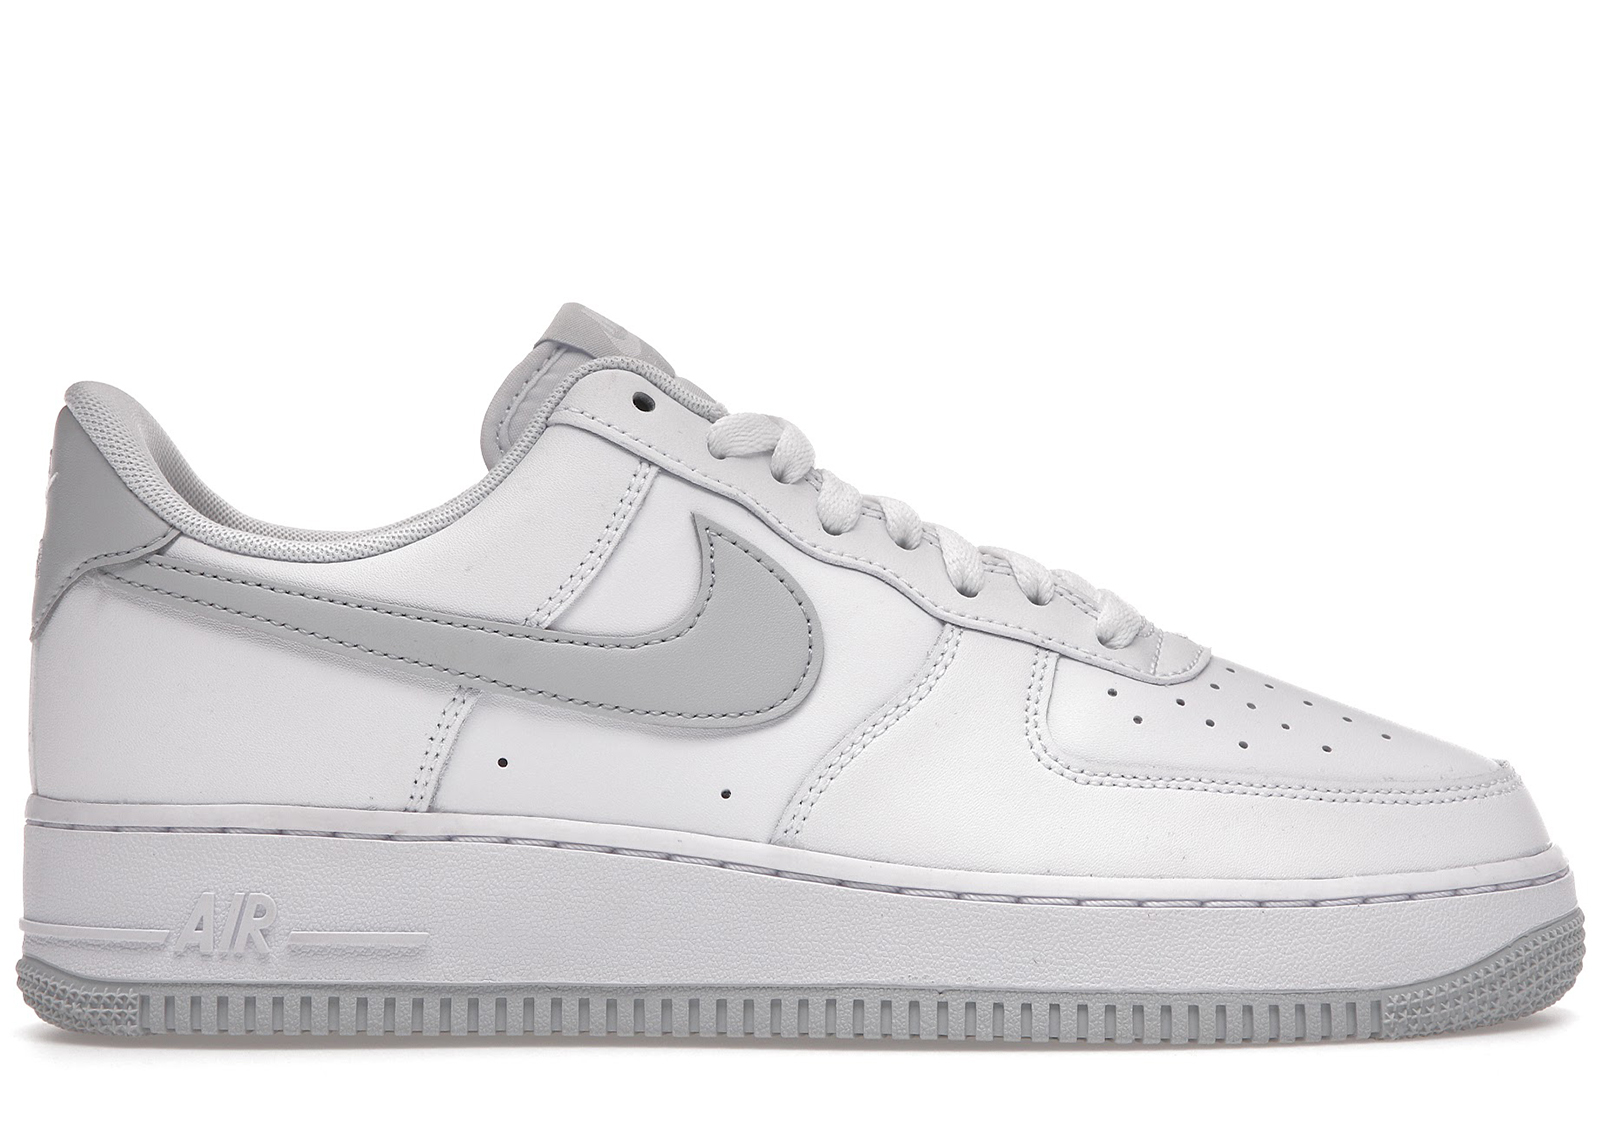 Nike Air Force 1 Low Valentine's Day (2021) Men's - DD7117-100 - US